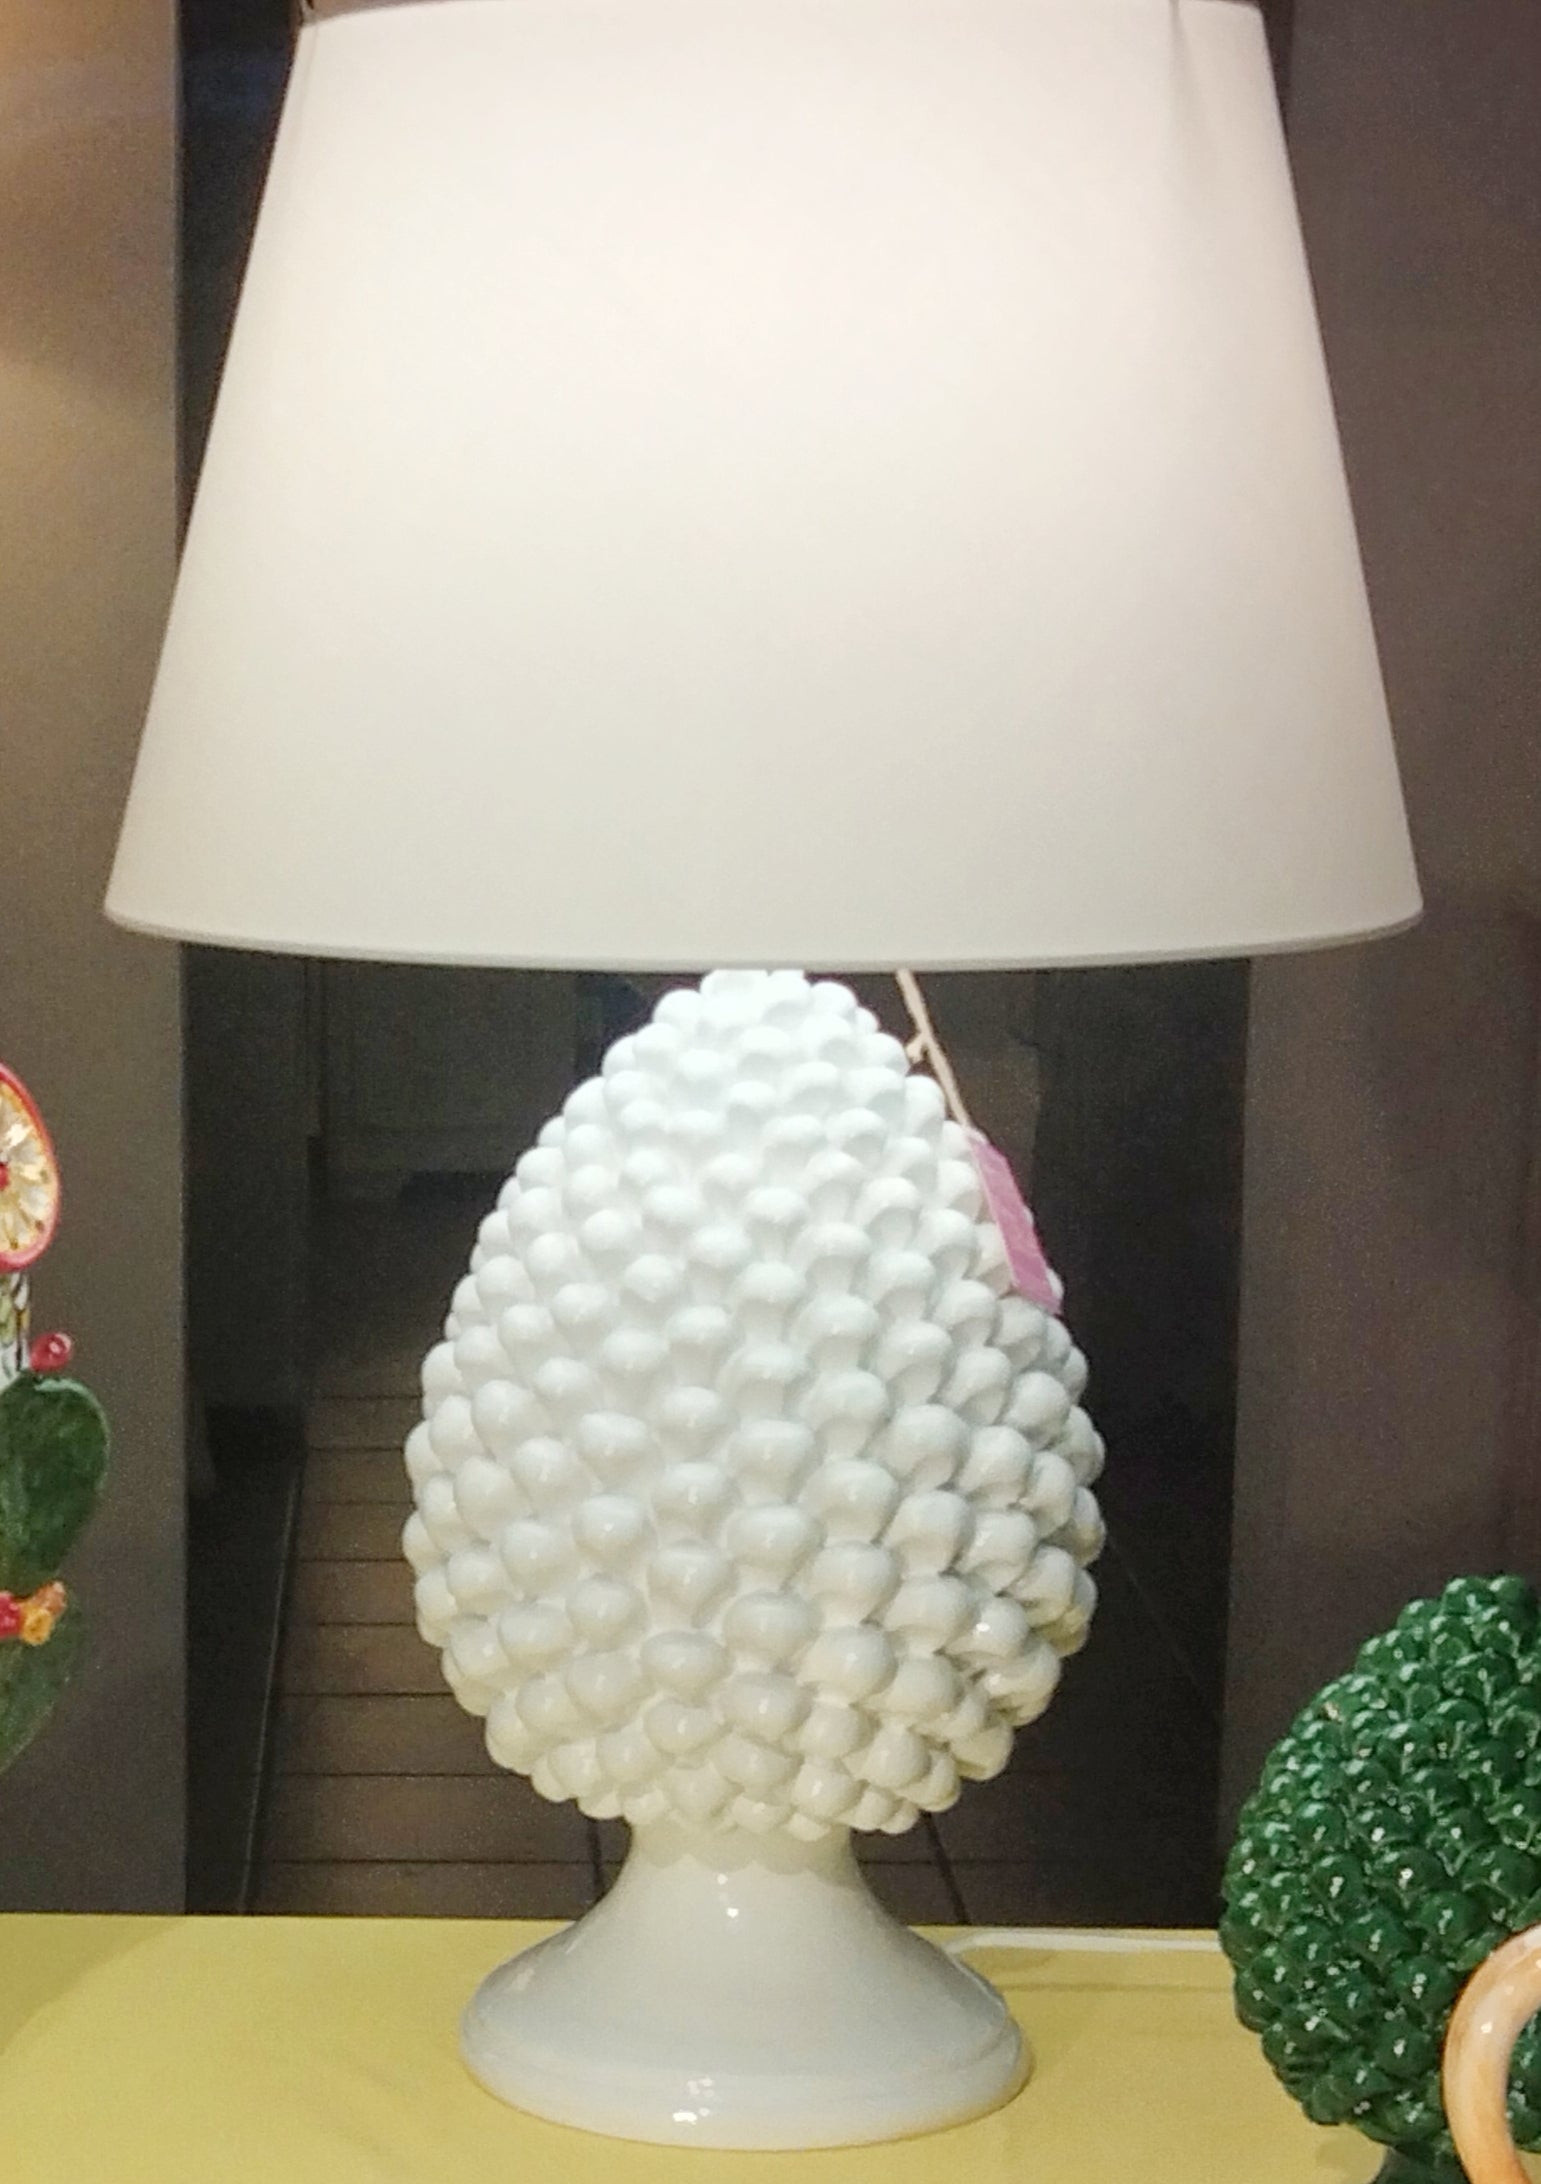 Lamp with pine cone base